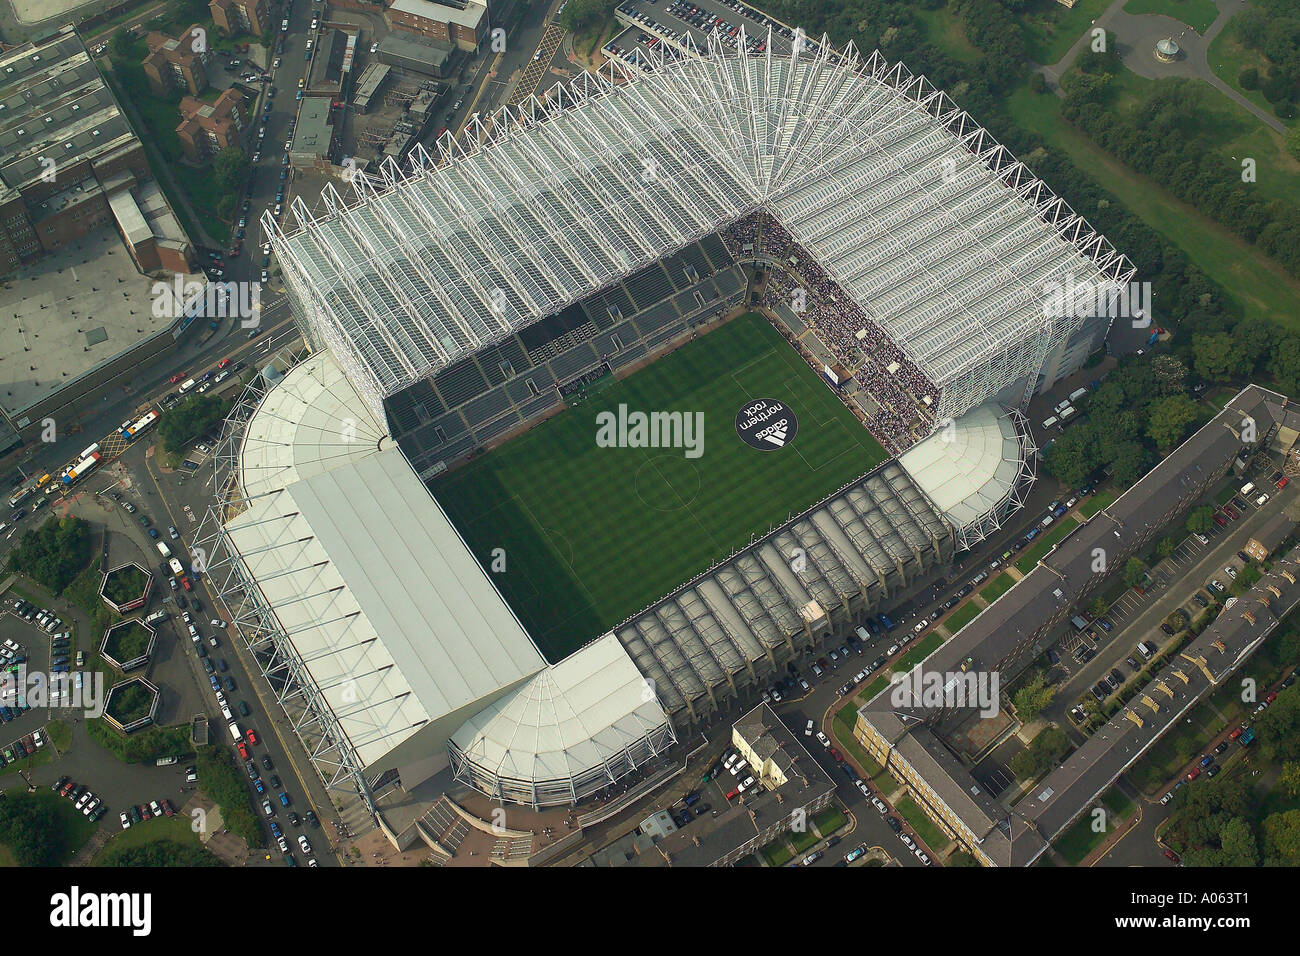 aerial-view-of-newcastle-united-football-club-also-known-as-st-james-A063T1.jpg